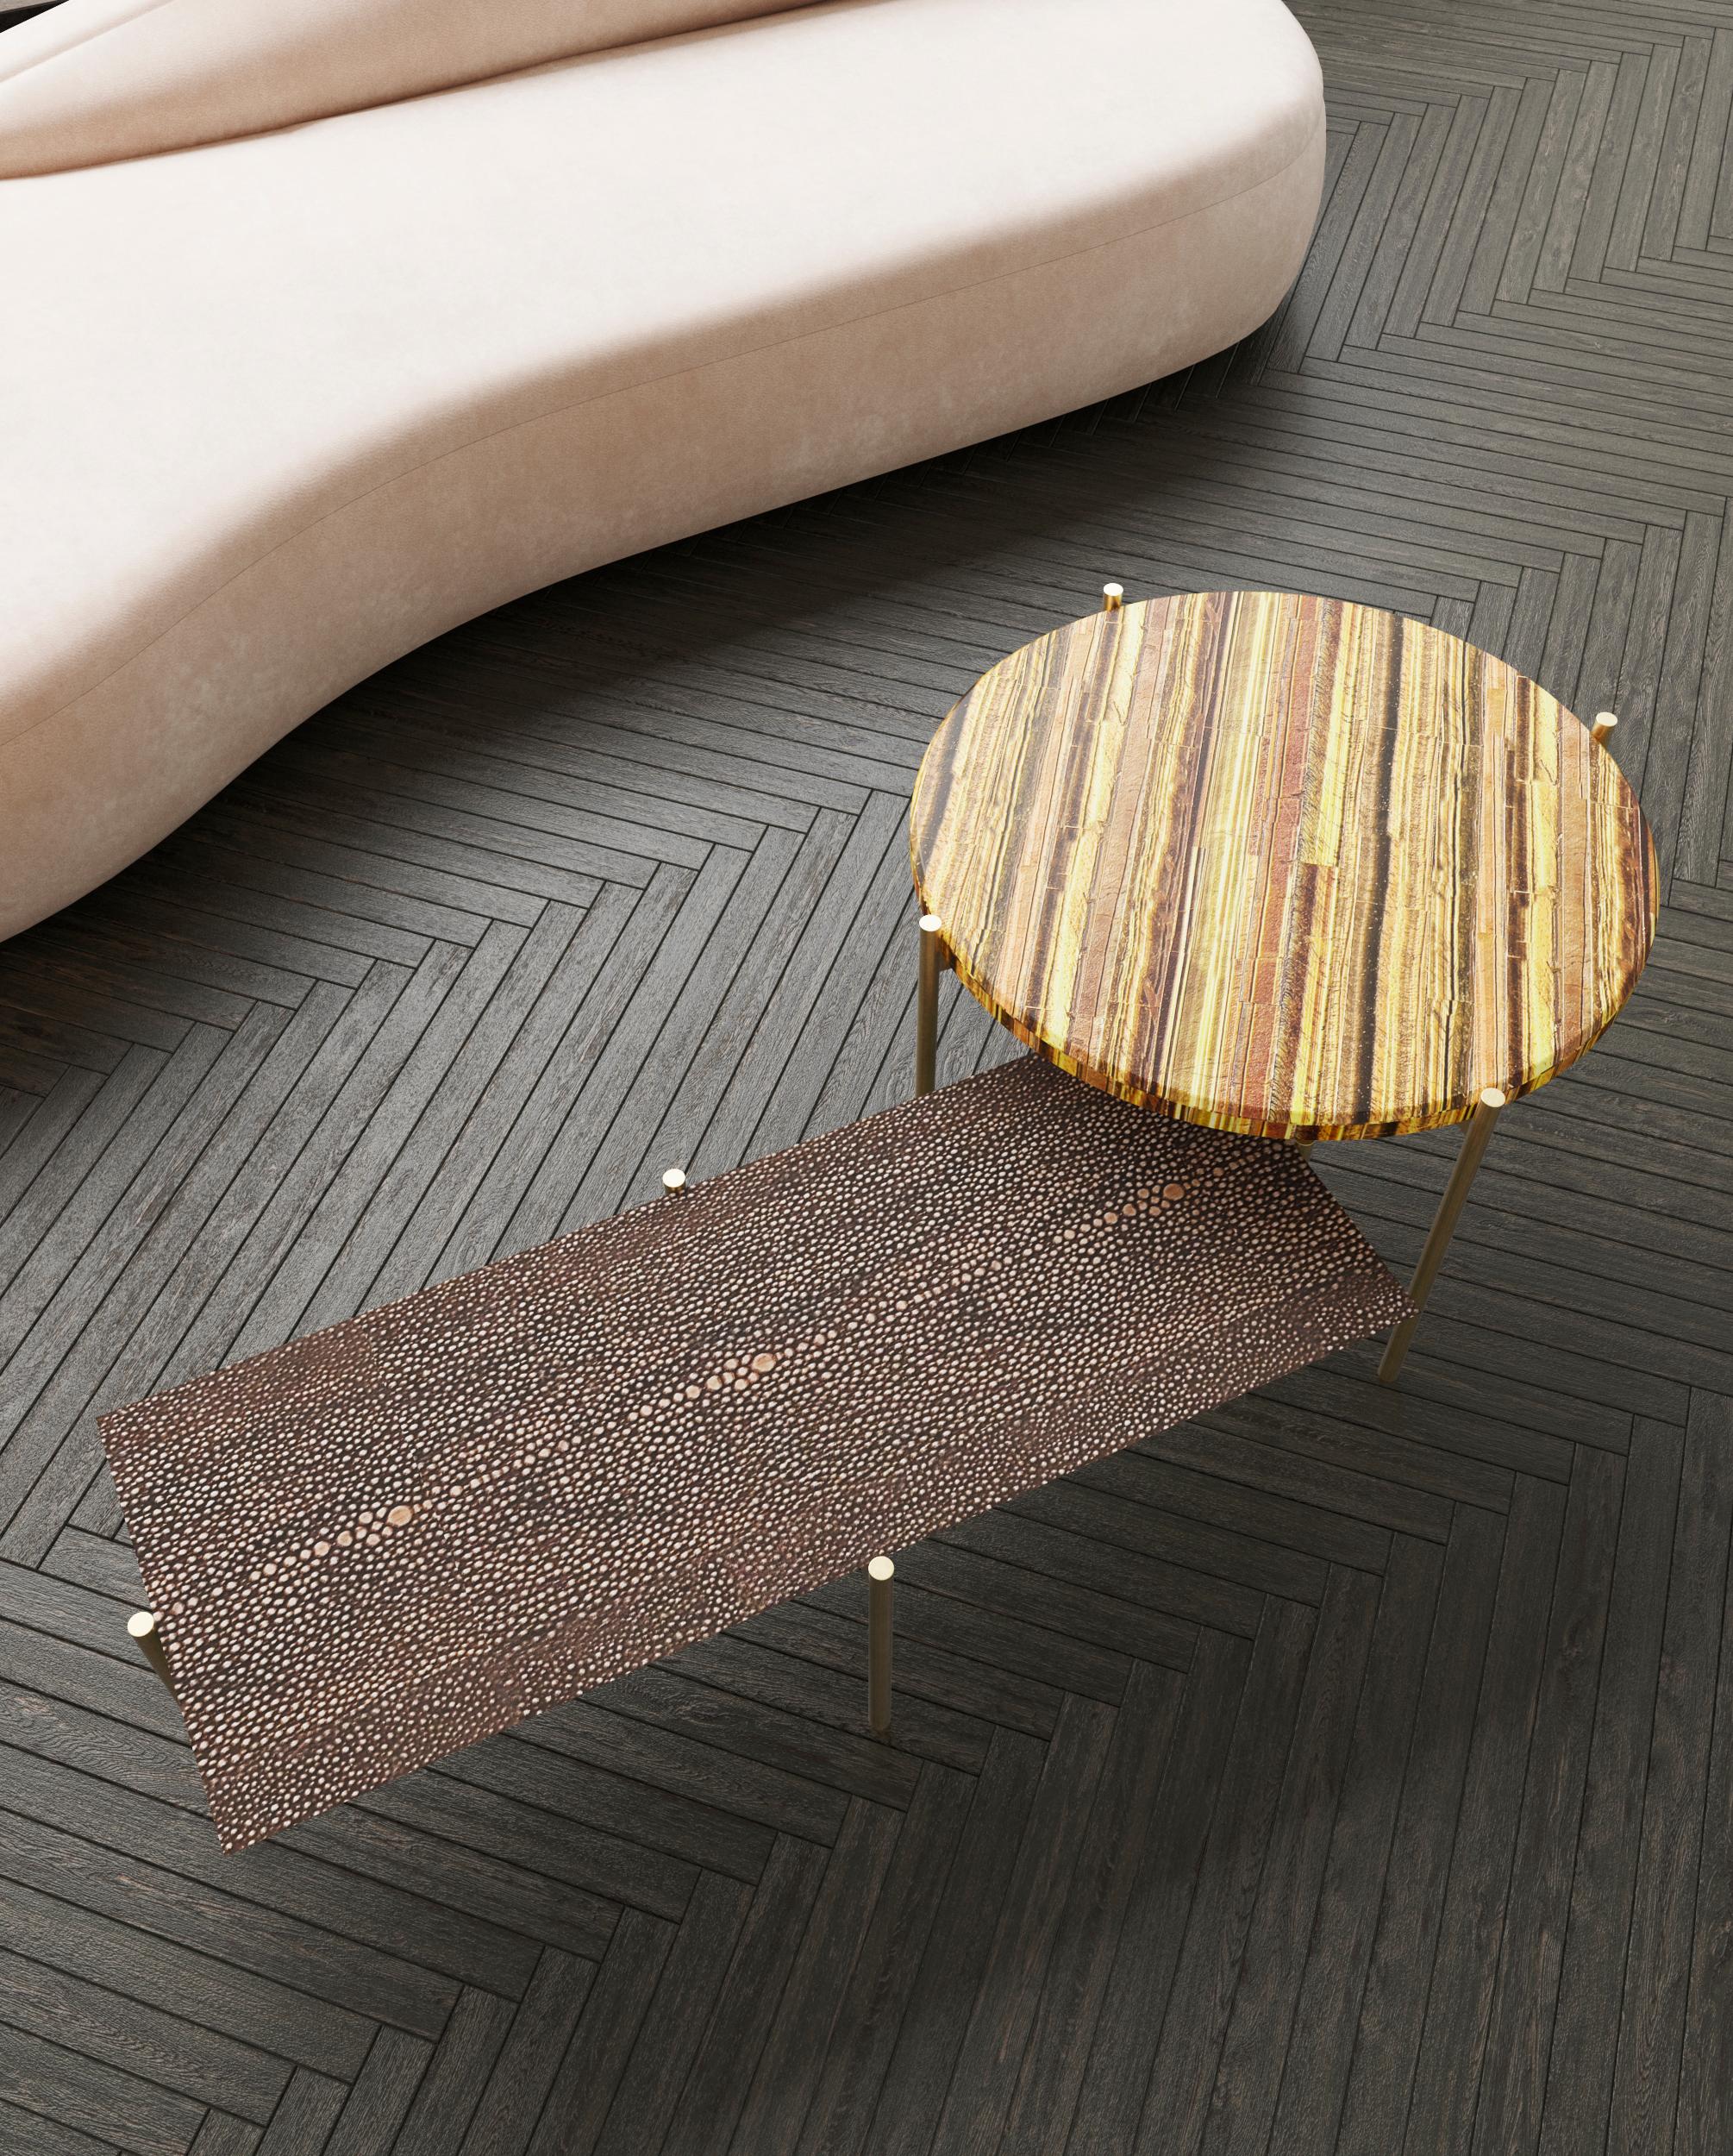 Post-Modern Tiger Eye´s Precious Stone and Wood Tom & Tom Table Handsculpted by ELEMENT&CO